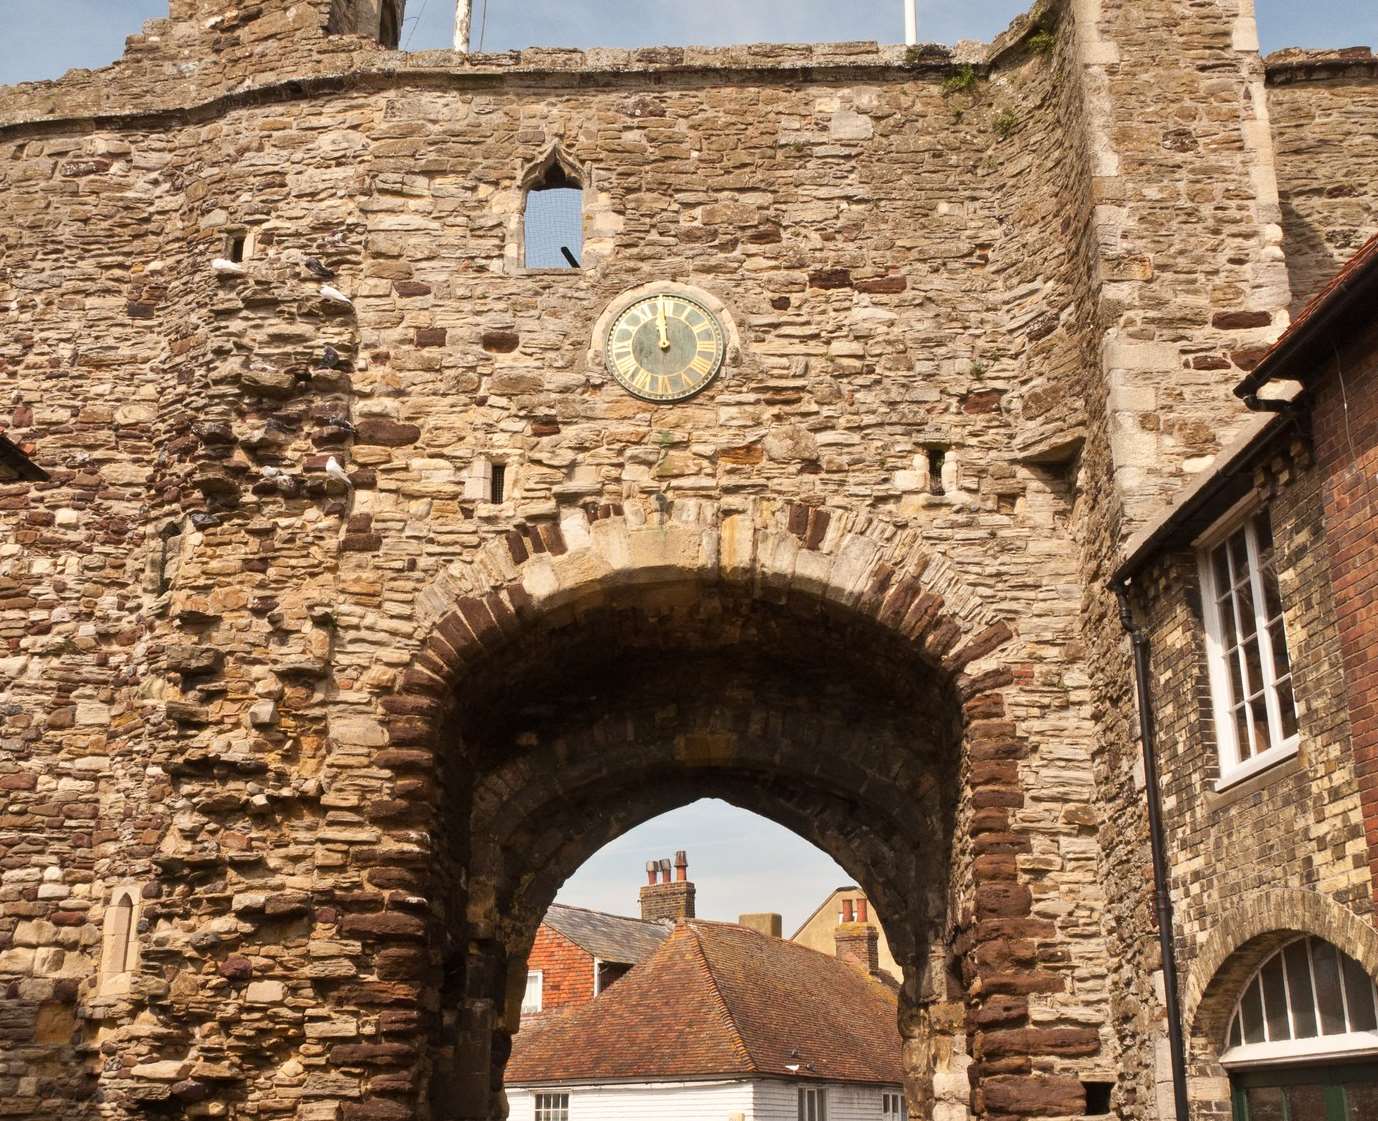 Rye's walled city town gate